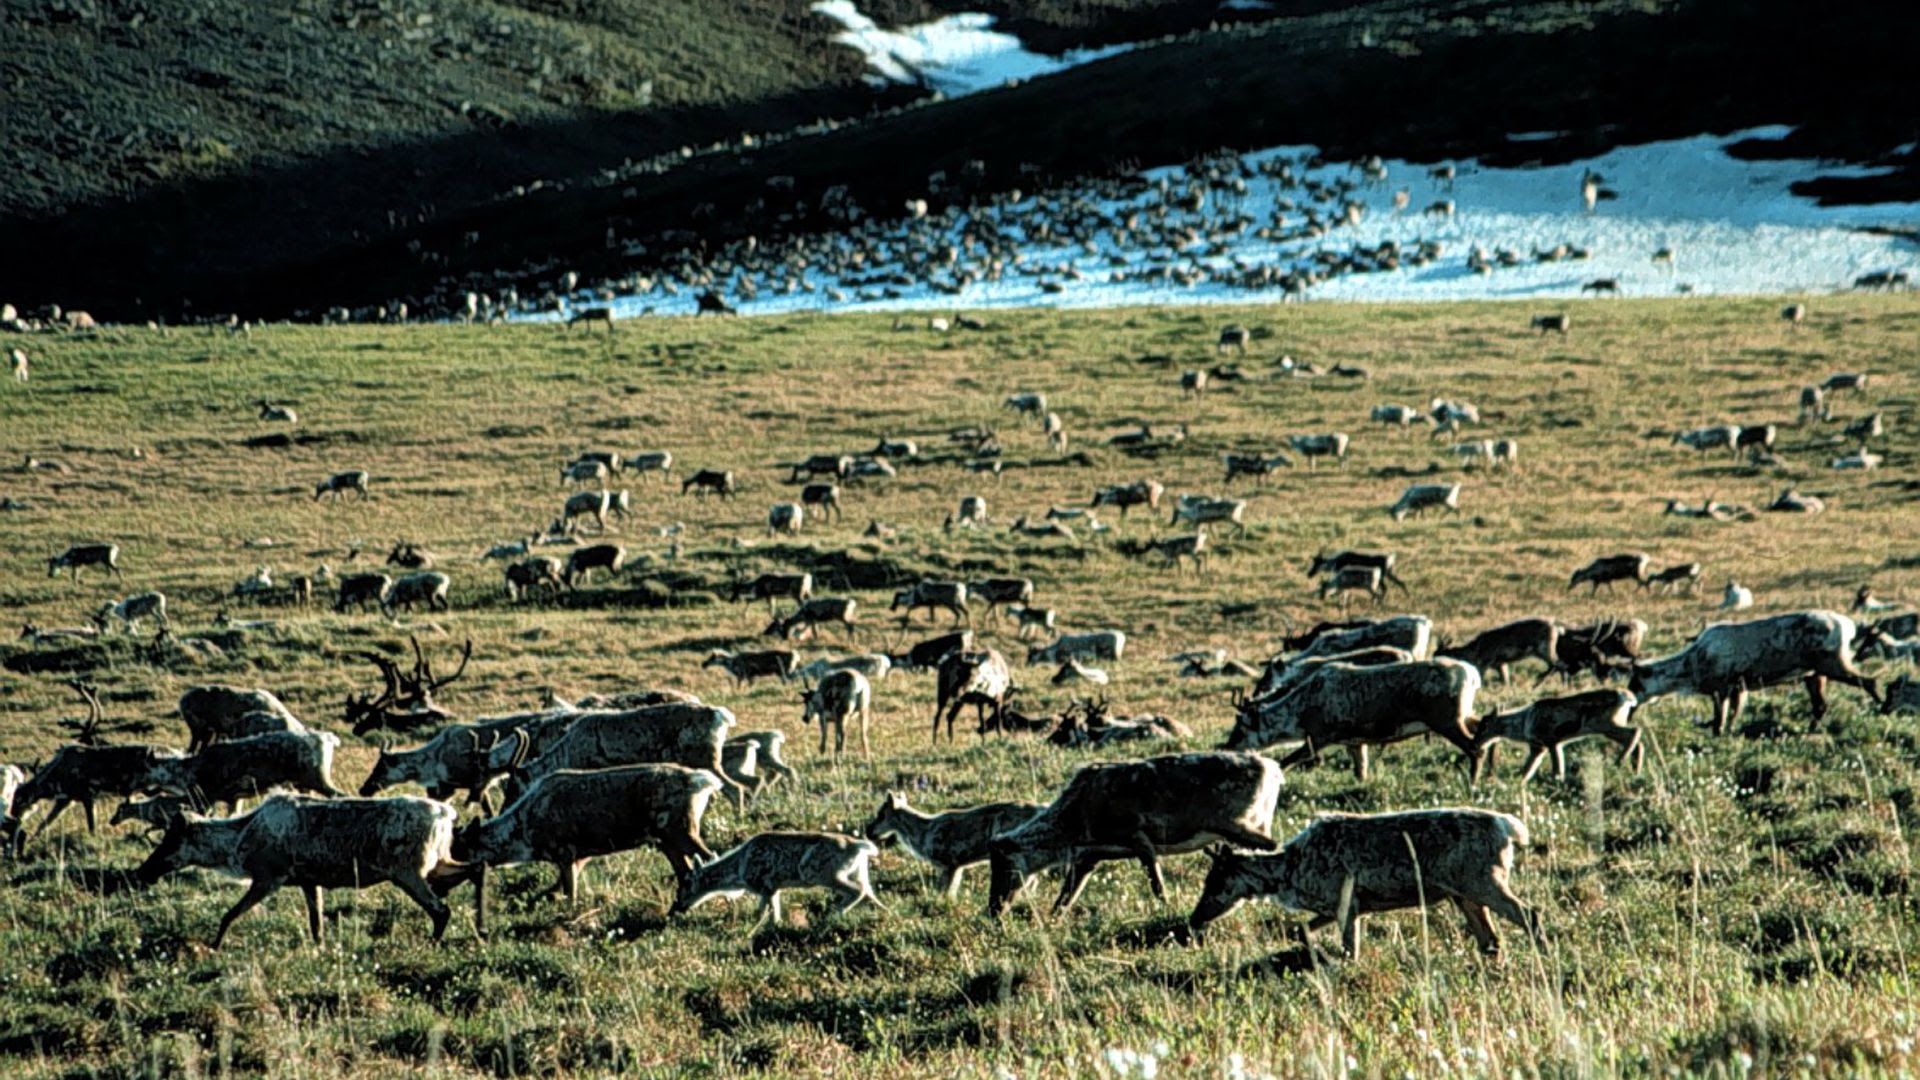 Caribou graze in the Arctic National Wildlife Refuge in Alaska. Photo: U.S. Fish and Wildlife Service / Getty Images